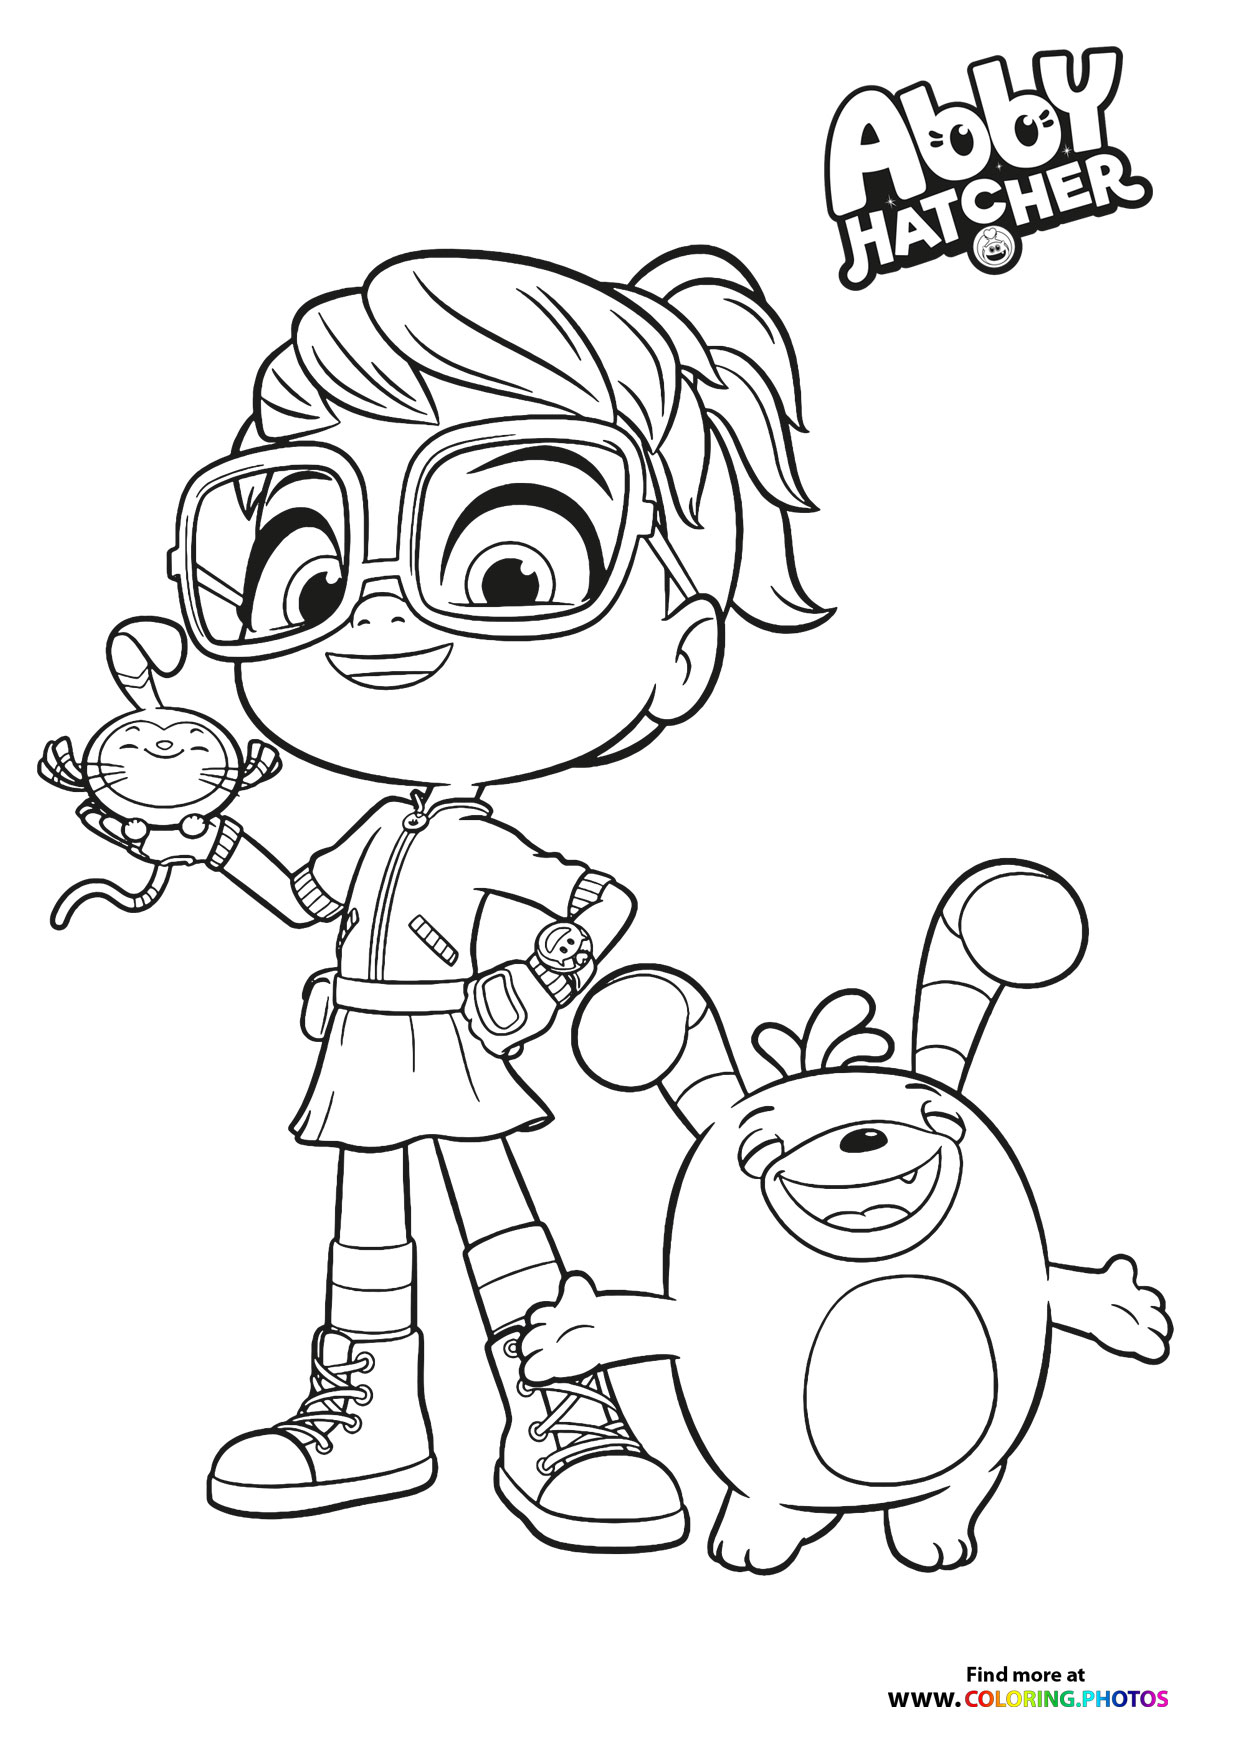 Abby Hatcher and Bozzly   Coloring Pages for kids